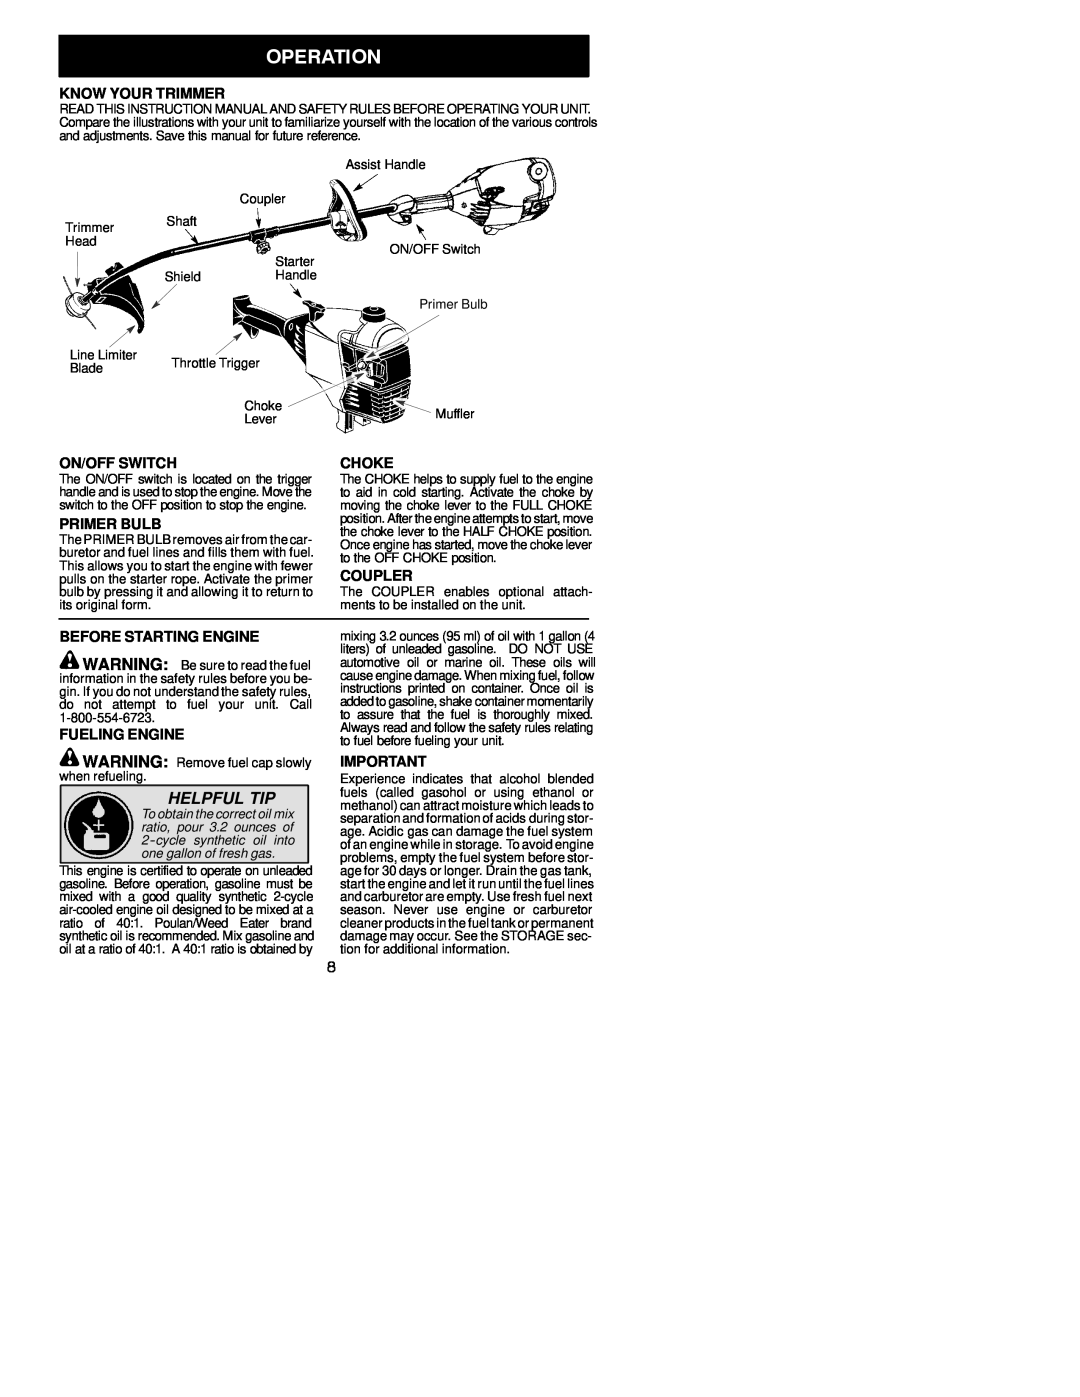 Poulan 530164253 Helpful Tip, Know Your Trimmer, On/Off Switch, Choke, Primer Bulb, Coupler, Before Starting Engine 